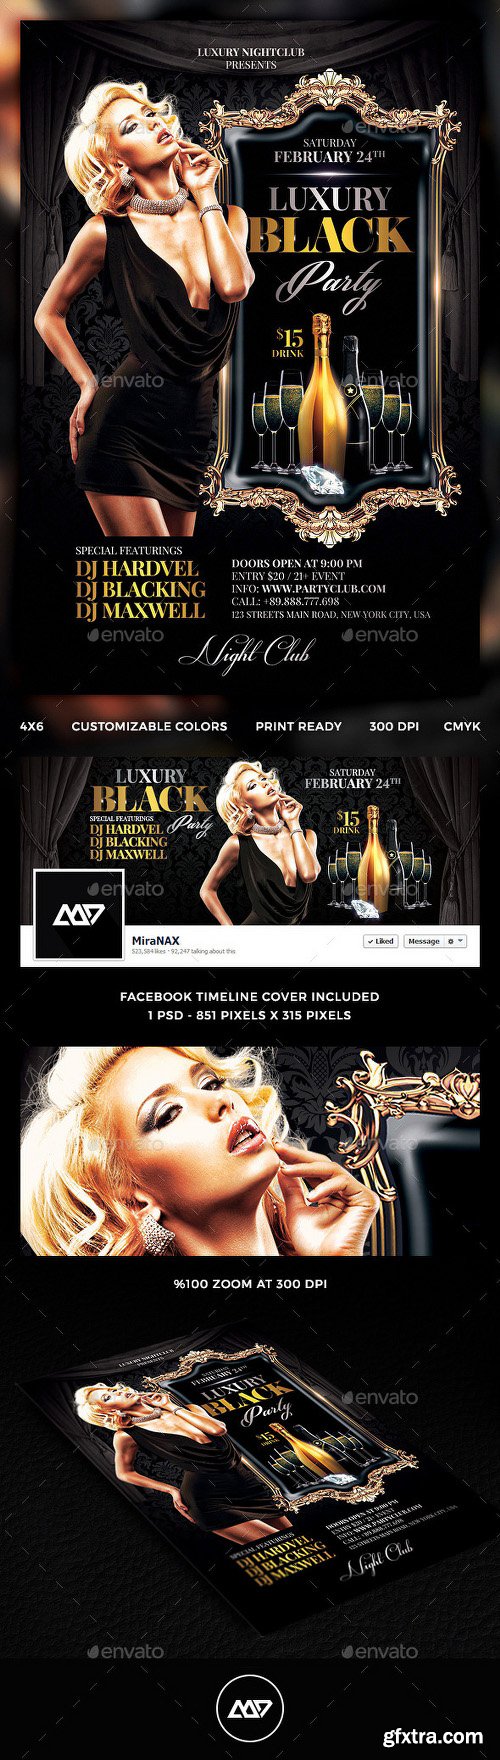 Graphicriver Luxury Black Party Flyer 11957375